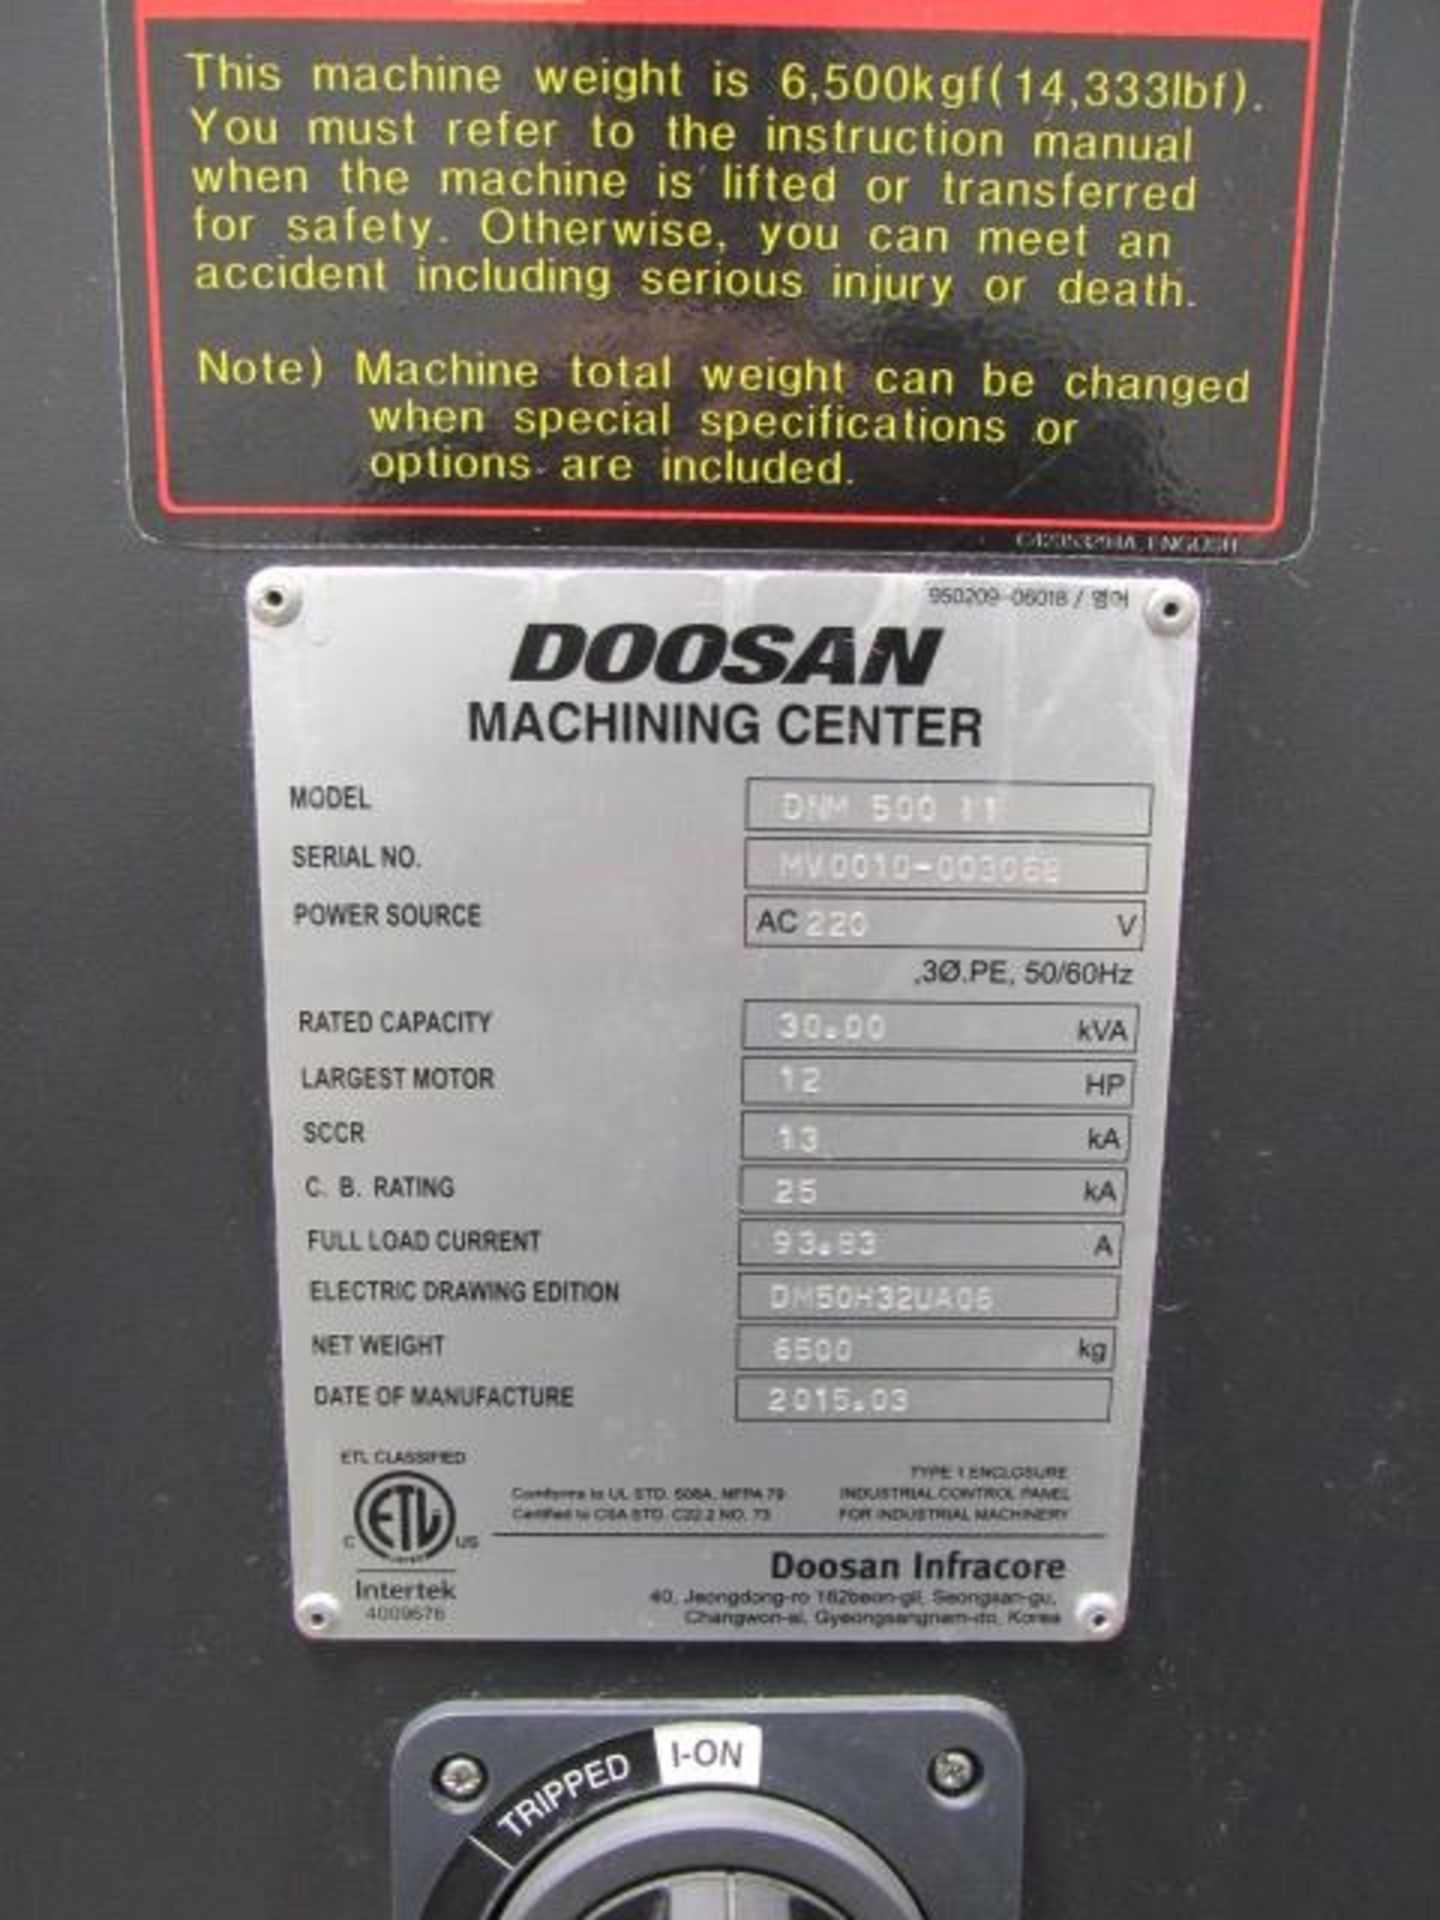 Doosan DNM 500 II CNC Vertical Machining Centers with 47.2'' x 21.2'' Tables, Big Plus #40, - Image 8 of 9